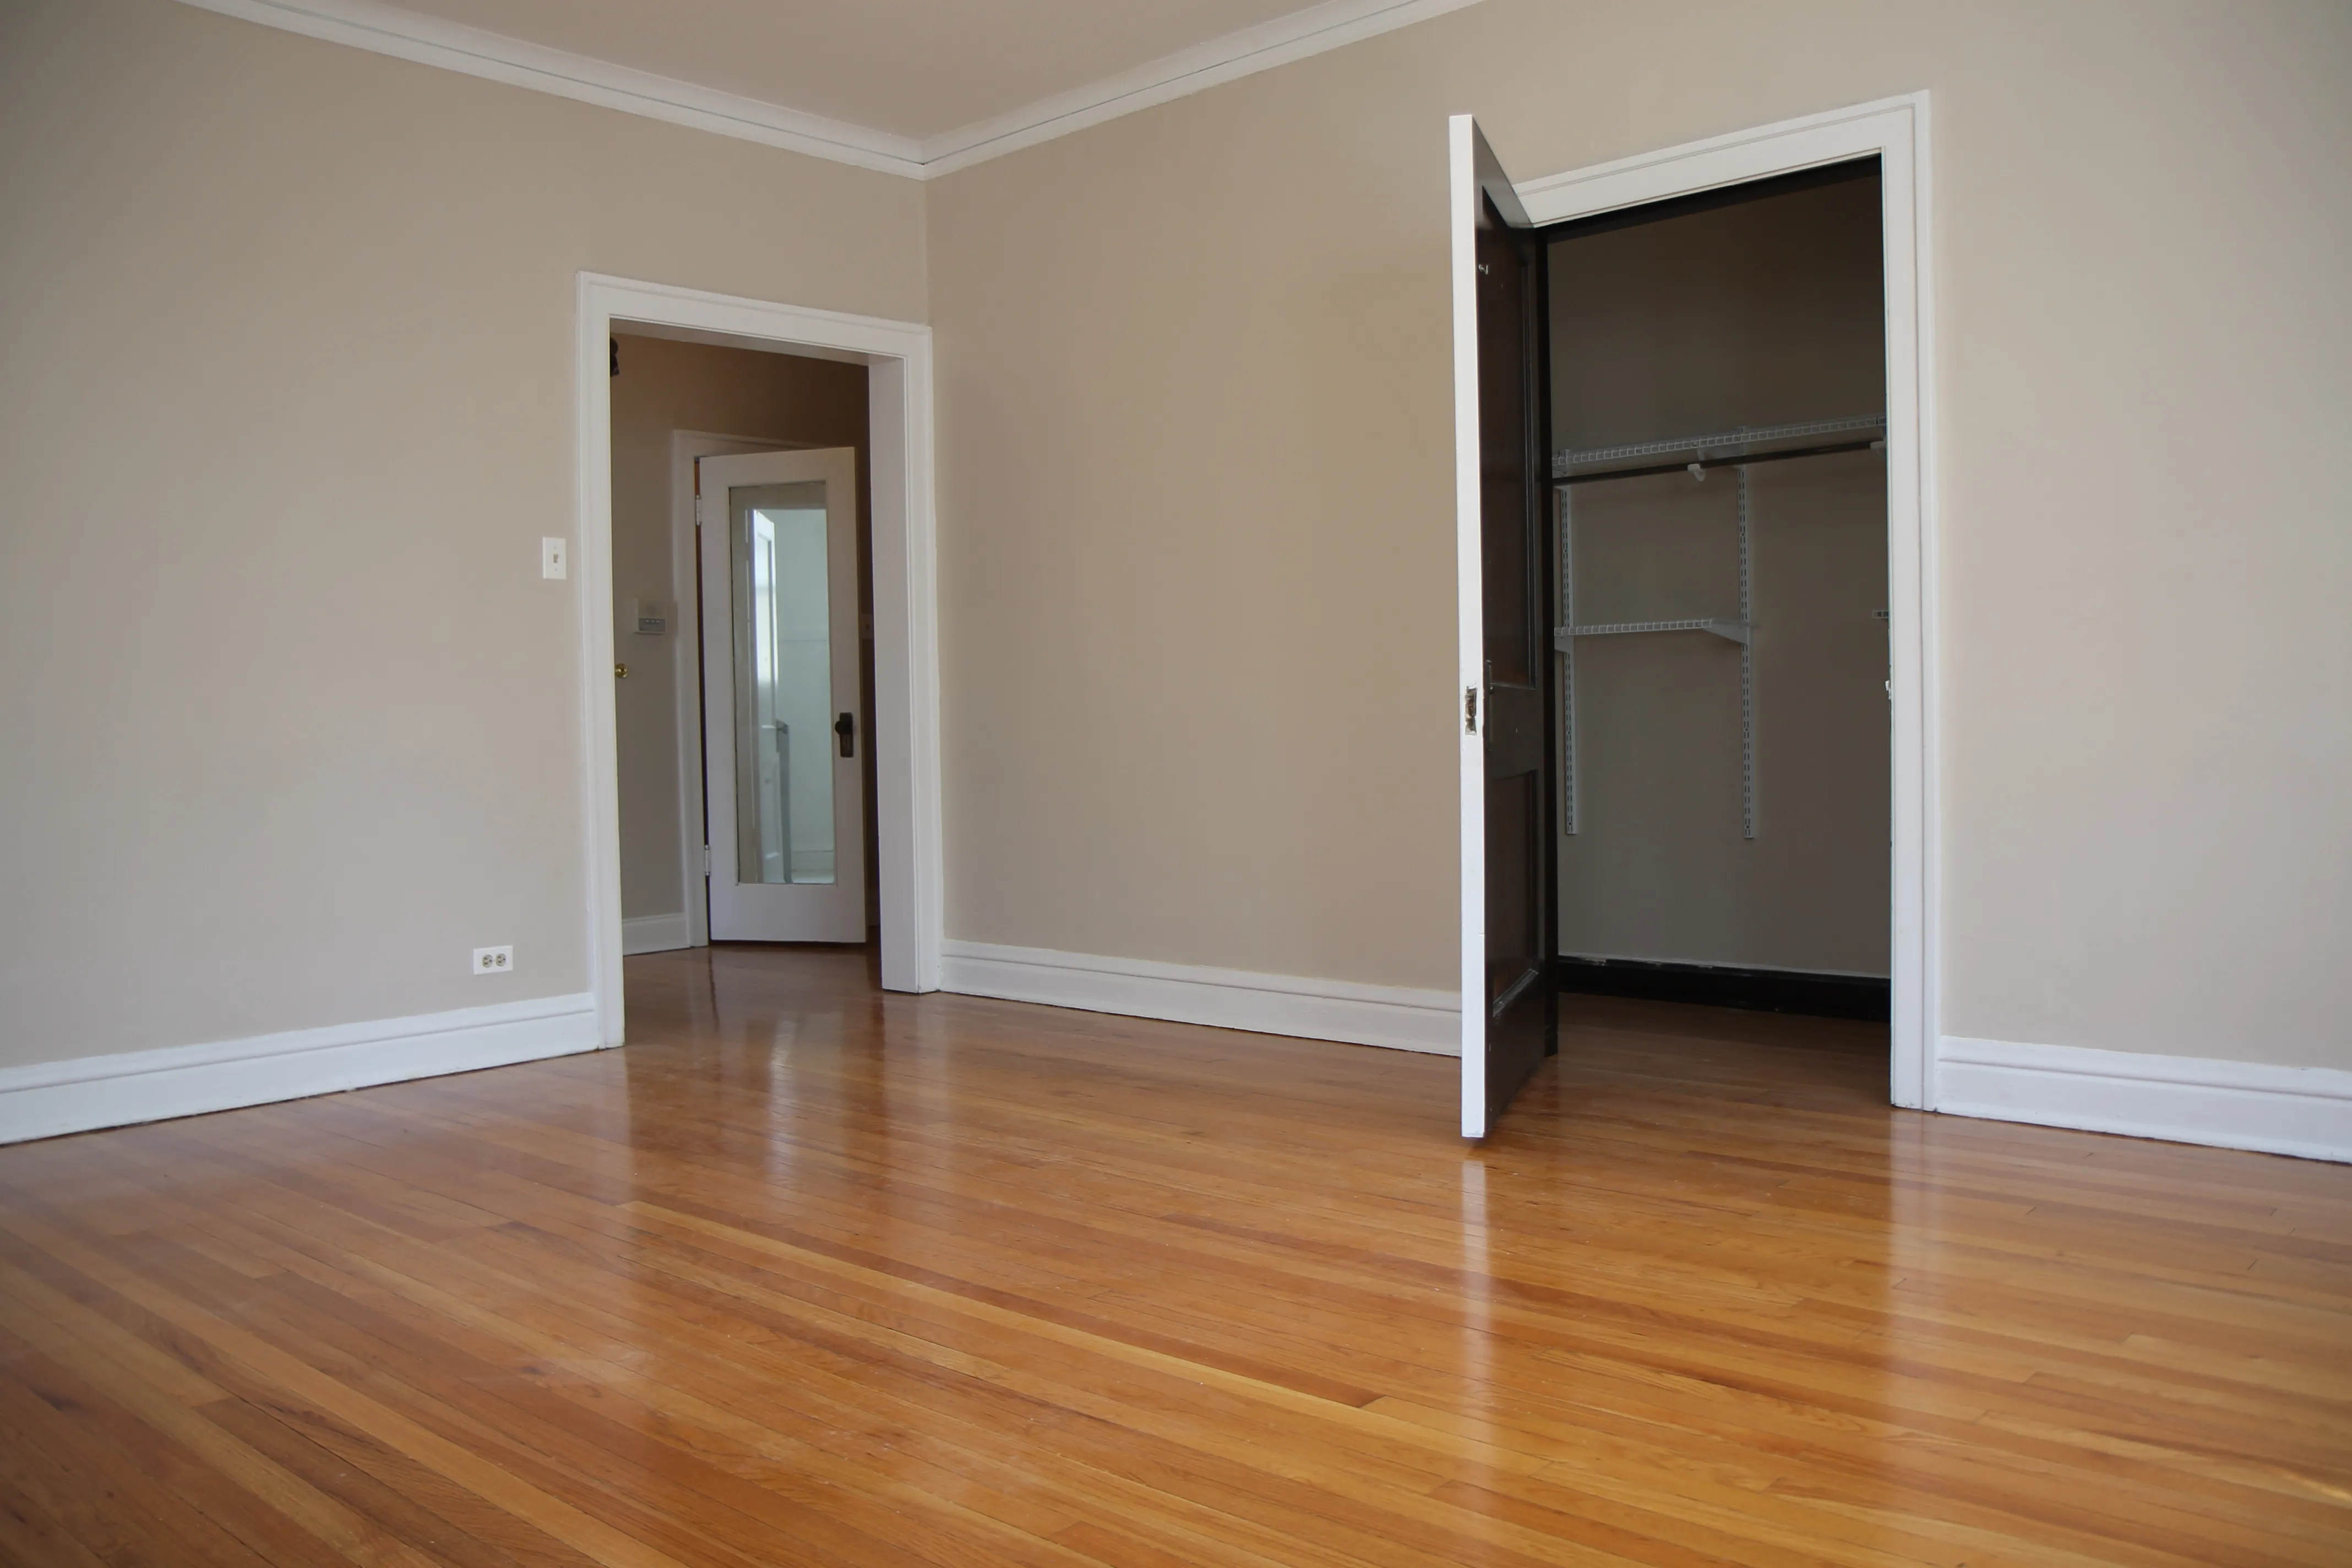 7522 N SEELEY AVE 60645-Seeley Apartments-unit#3E-Chicago-IL